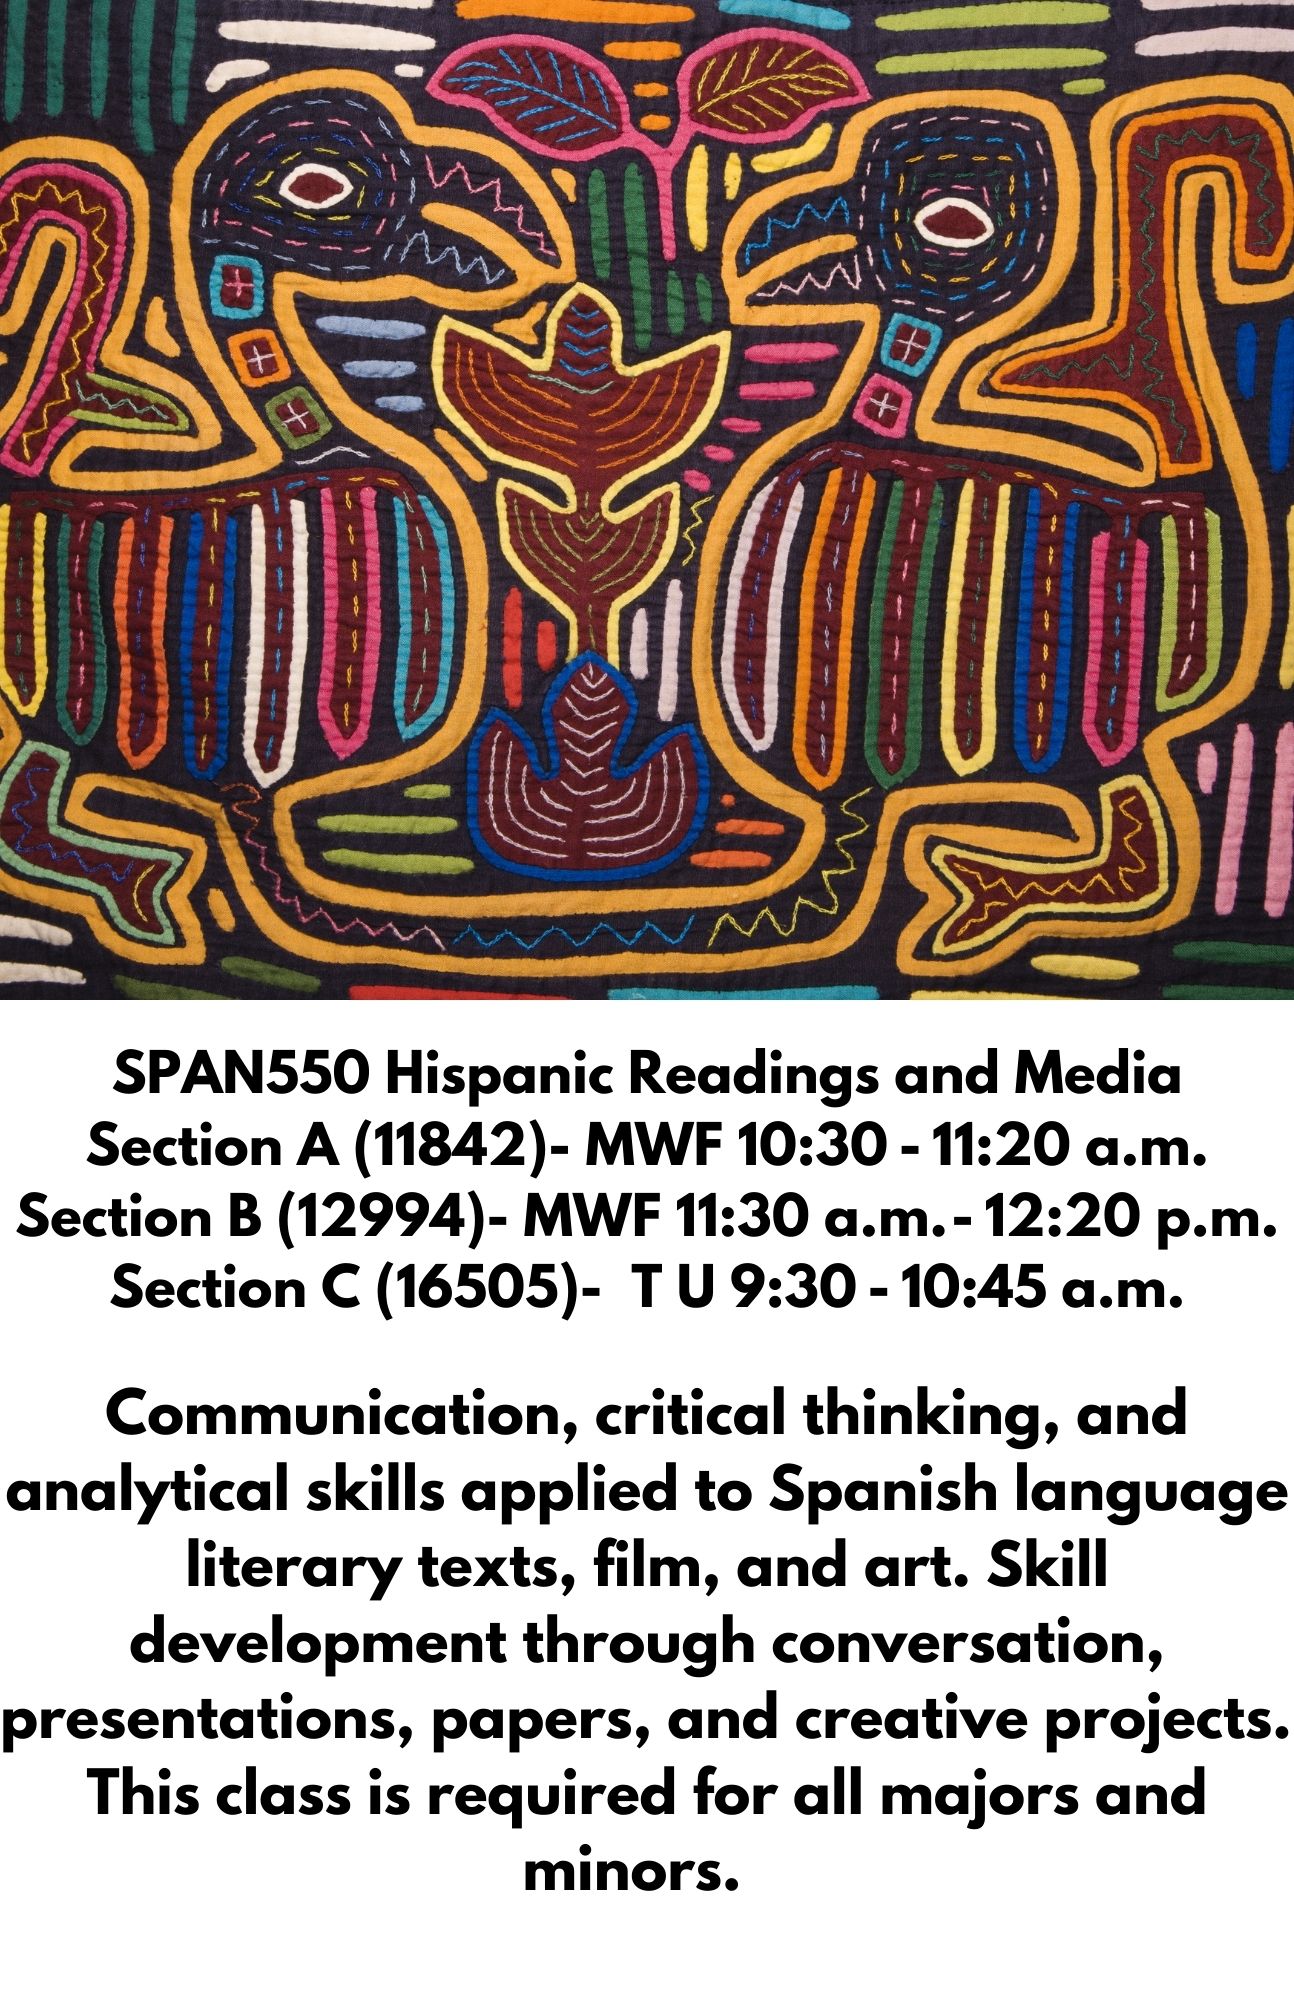 SPAN550 Hispanic Readings and Media Section A (11842)- MWF 10:30 - 11:20 a.m. Section B (12994)- MWF 11:30 a.m. - 12:20 p.m. Section C (16505)-  T U 9:30 - 10:45 a.m.  Communication, critical thinking, and analytical skills applied to Spanish language literary texts, film, and art. Skill development through conversation, presentations, papers, and creative projects.  This class is required for all majors and minors.